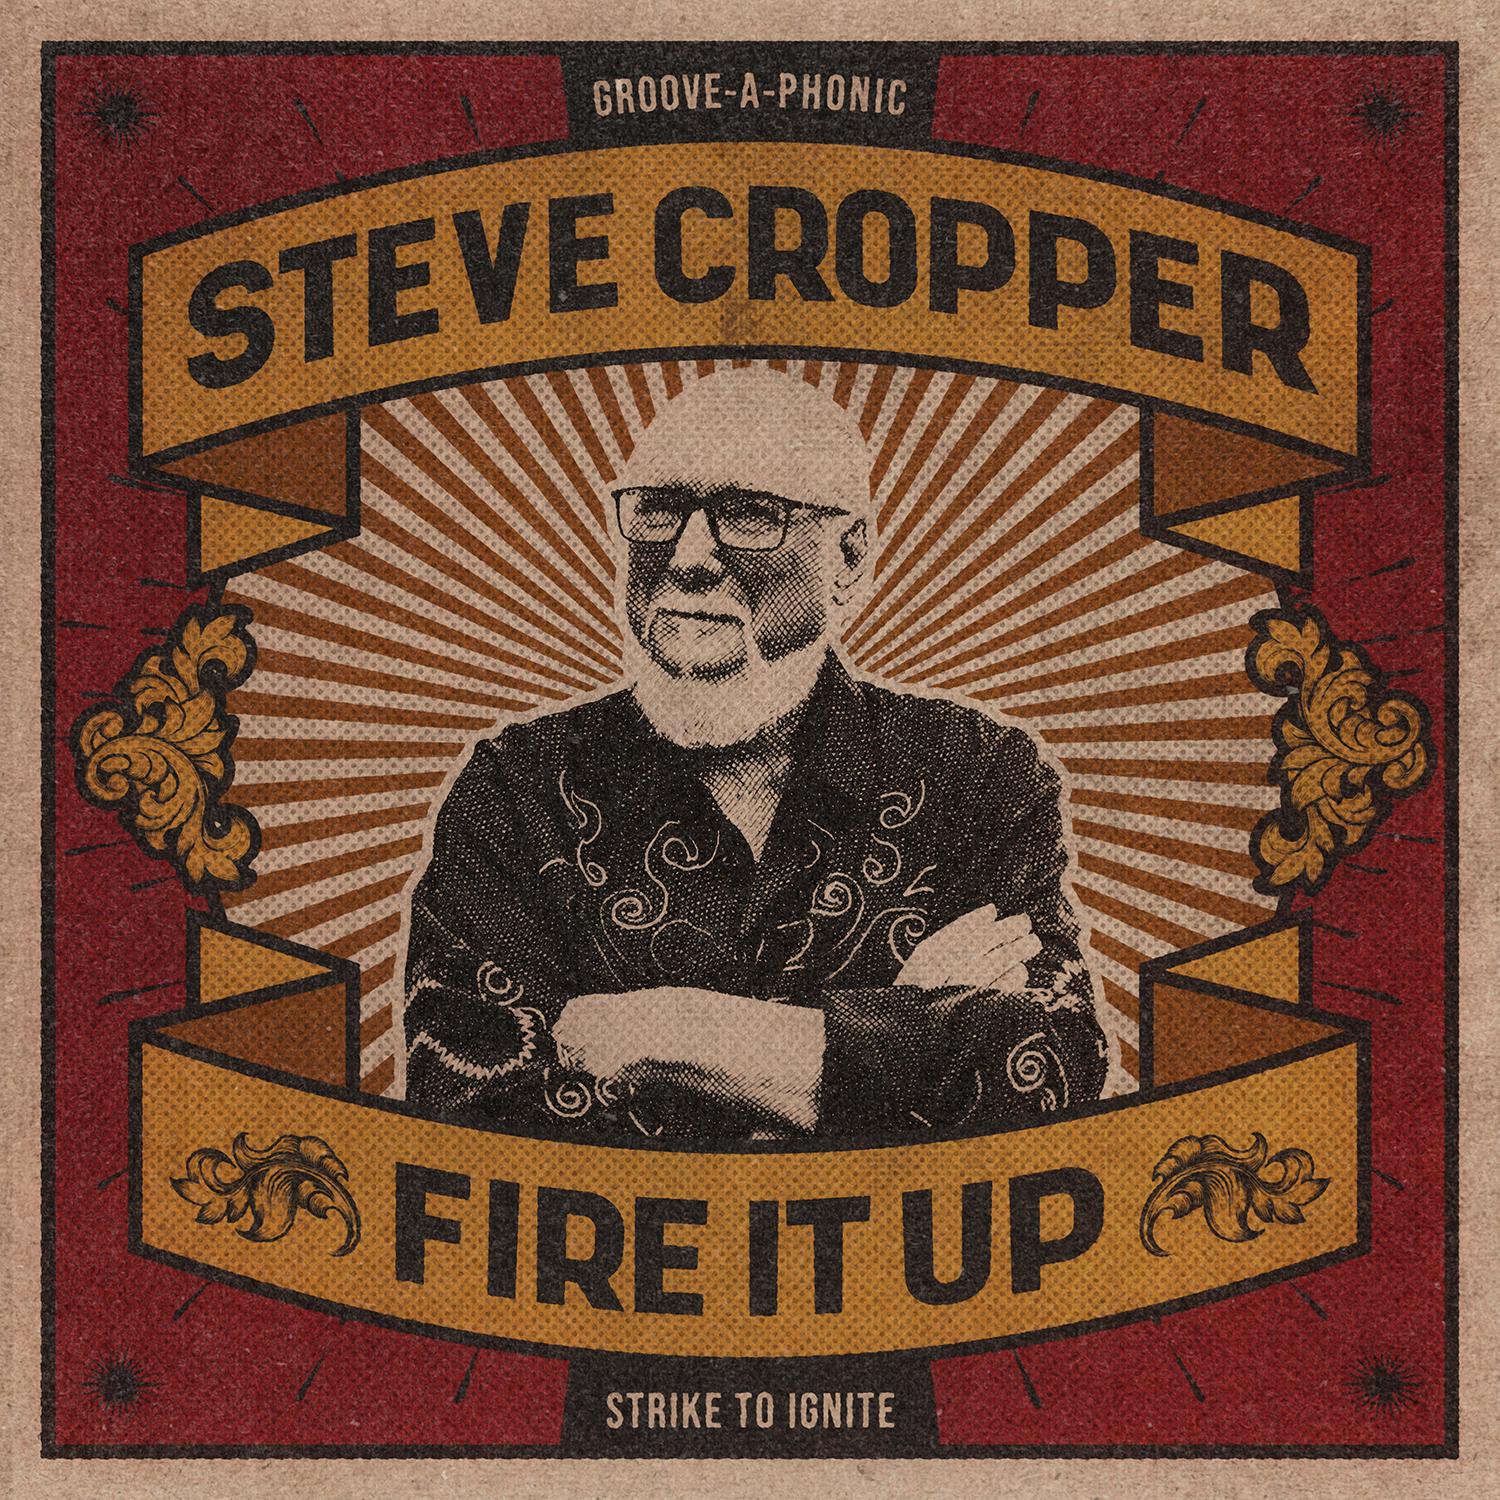 Steve Cropper - The Go-Getter Is Gone